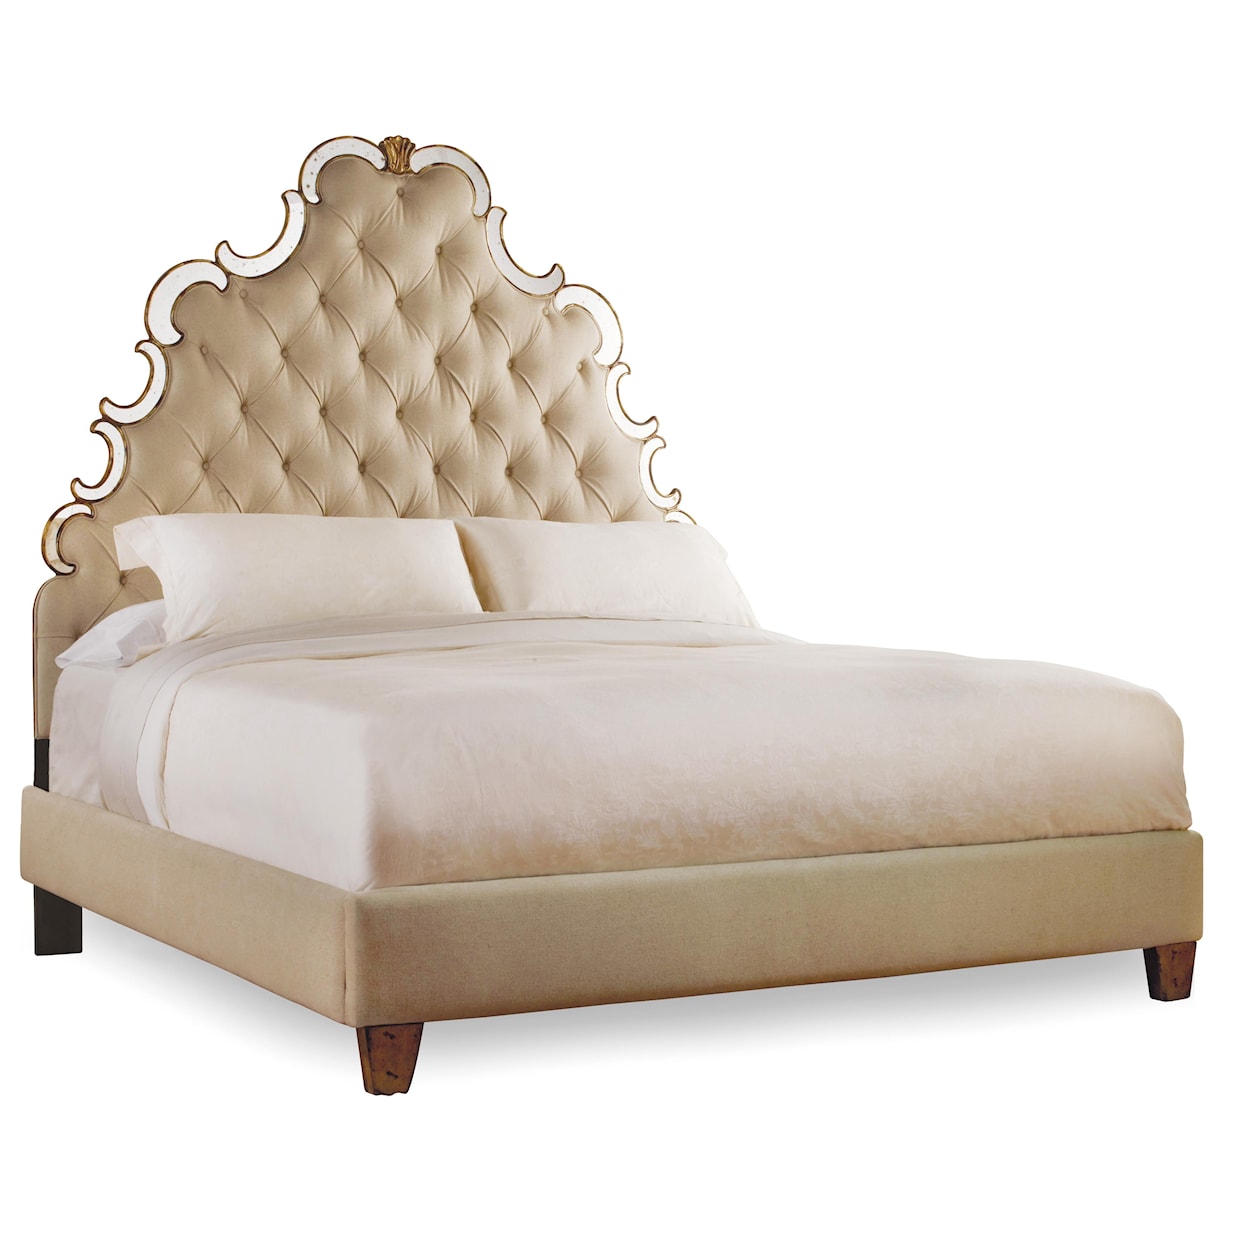 Hooker Furniture Sanctuary California King Tufted Bed